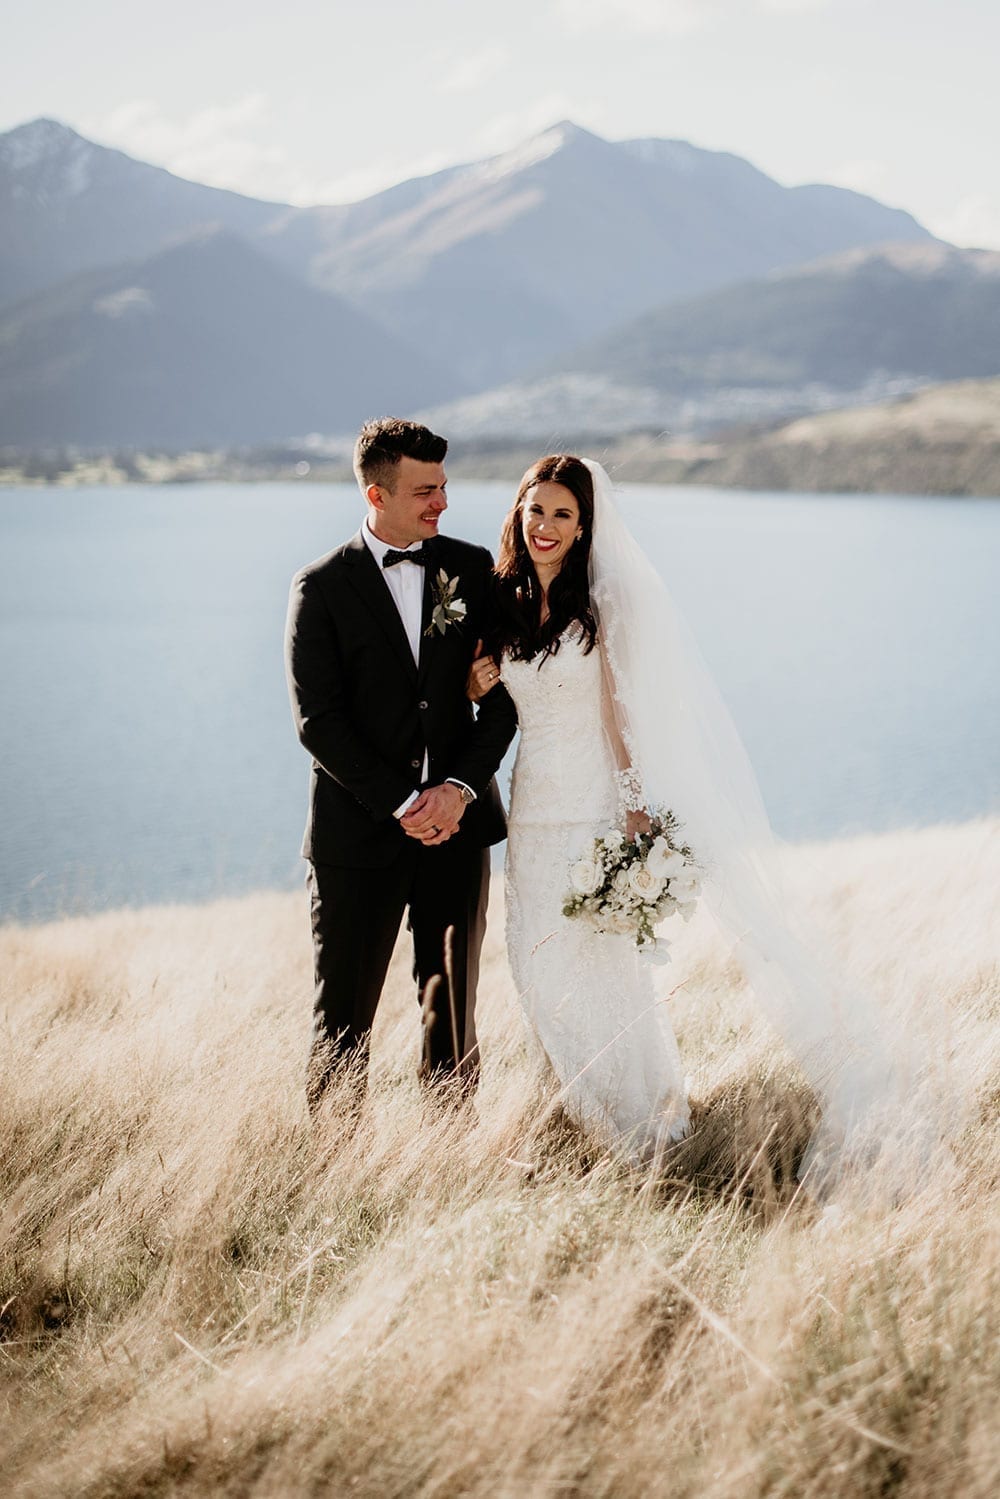 Vinka Design Features Real Weddings - Bride in custom made gown with groom in front of remarkables mountains